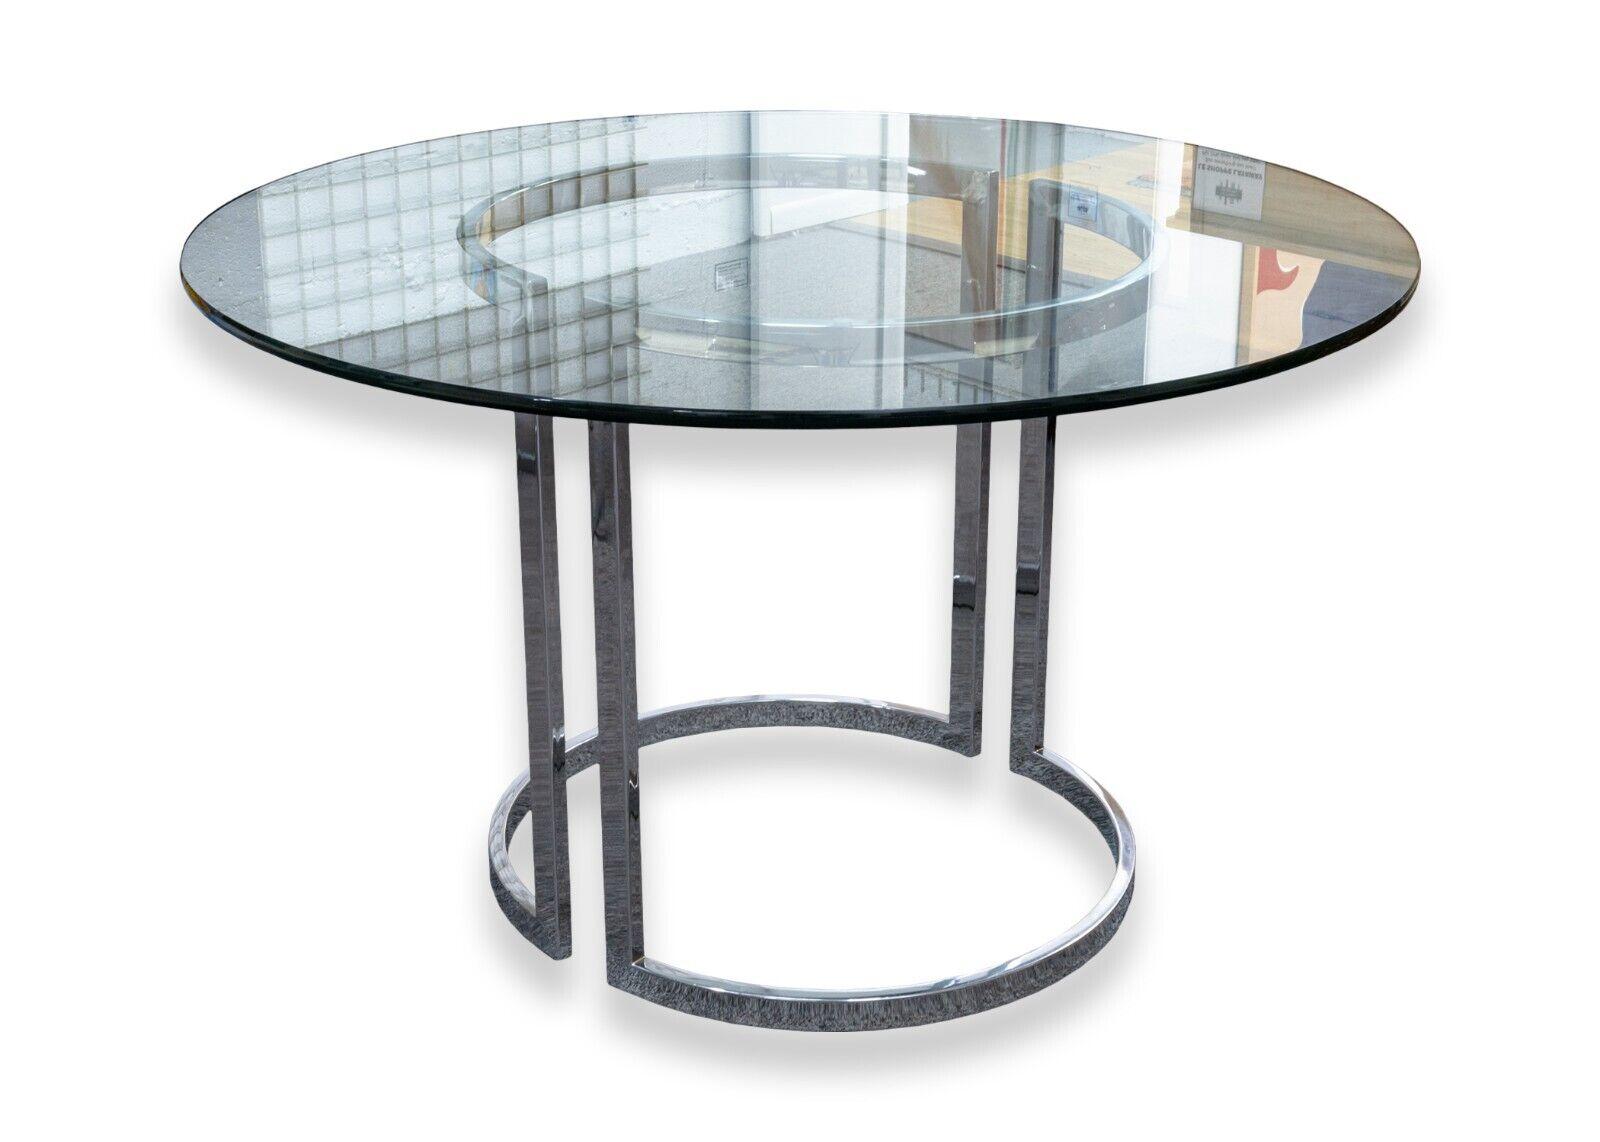 A Milo Baughman contemporary modern chrome dinette table and 4 chairs. A classic set from Milo Baughman featuring a round glass dinette table with a two piece chrome base, and 4 chrome dining chairs with a white upholstery. This whole set is in good